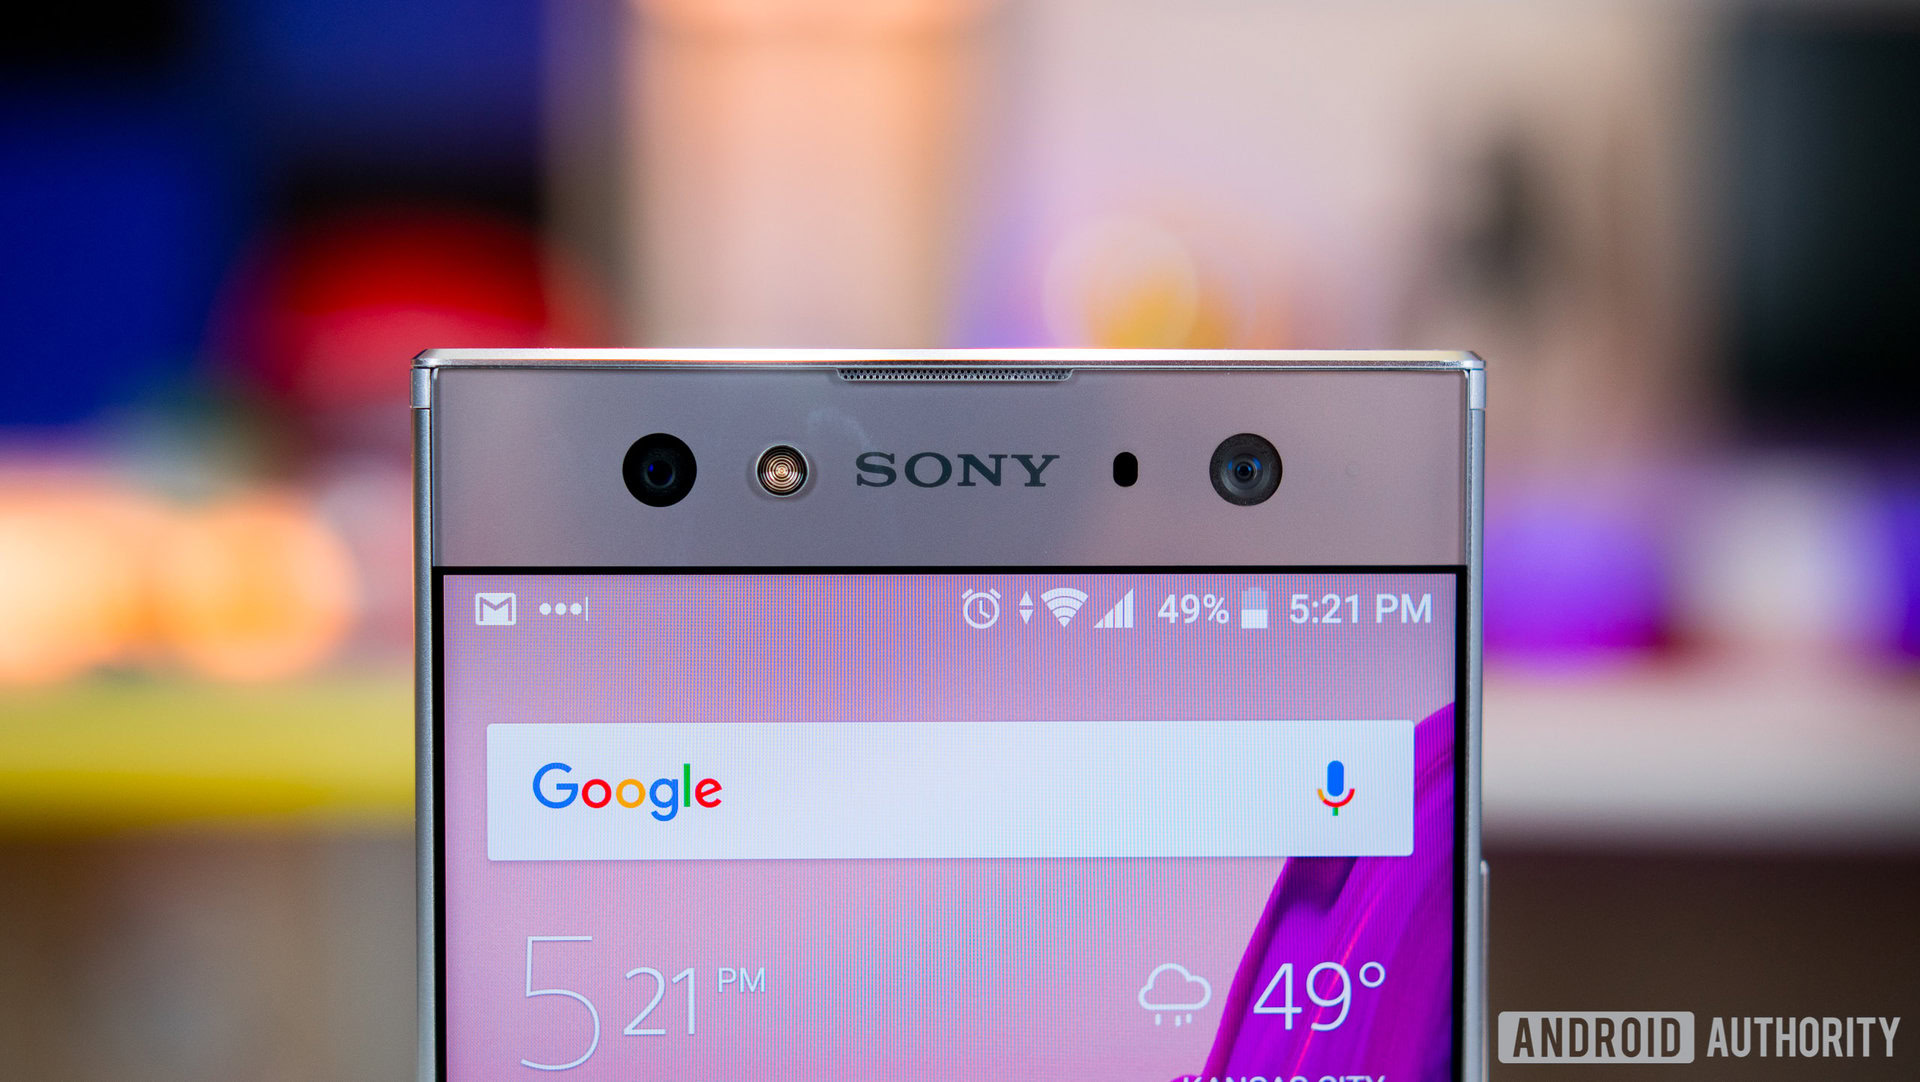 Piket cafe Missionaris Sony Xperia XA2 Ultra review with full phone specifications